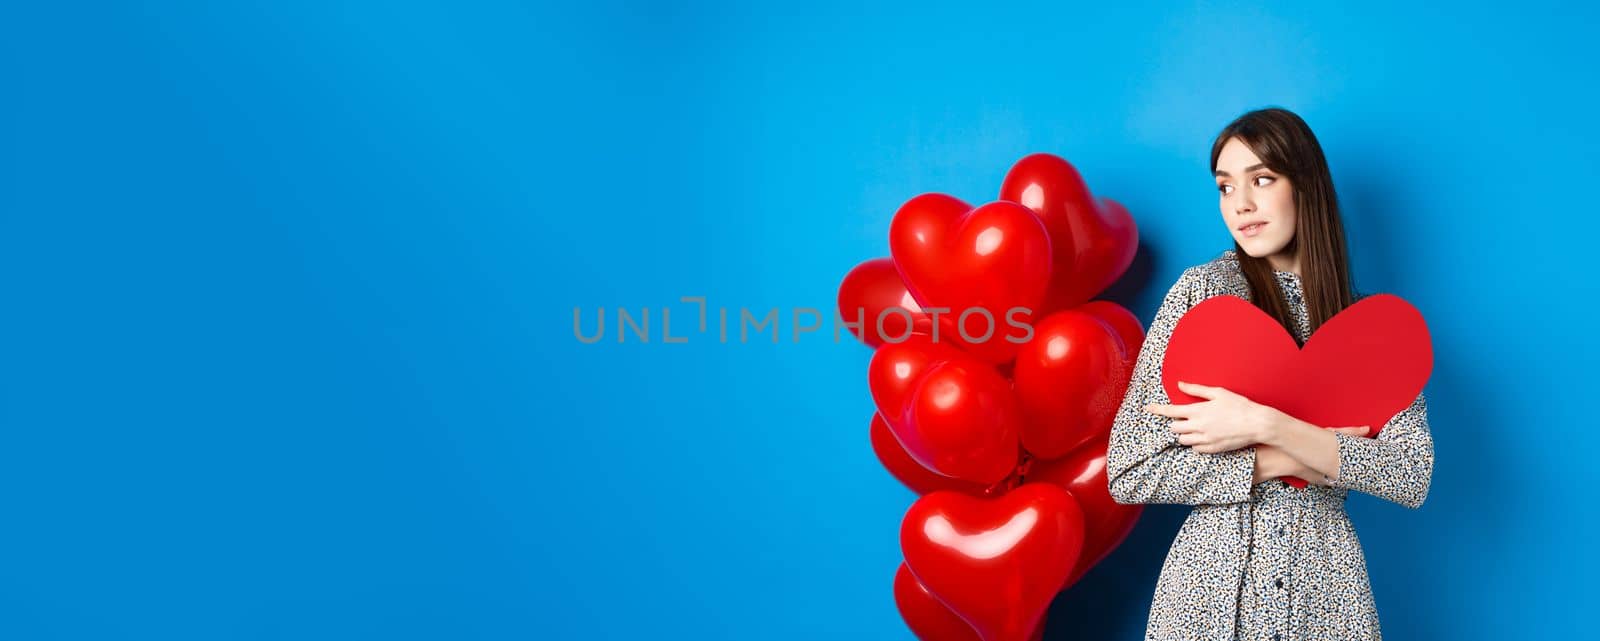 Valentines day. Beautiful and romantic woman looking pensive at balloons, hugging big red heart and smiling, waiting for love, blue background.